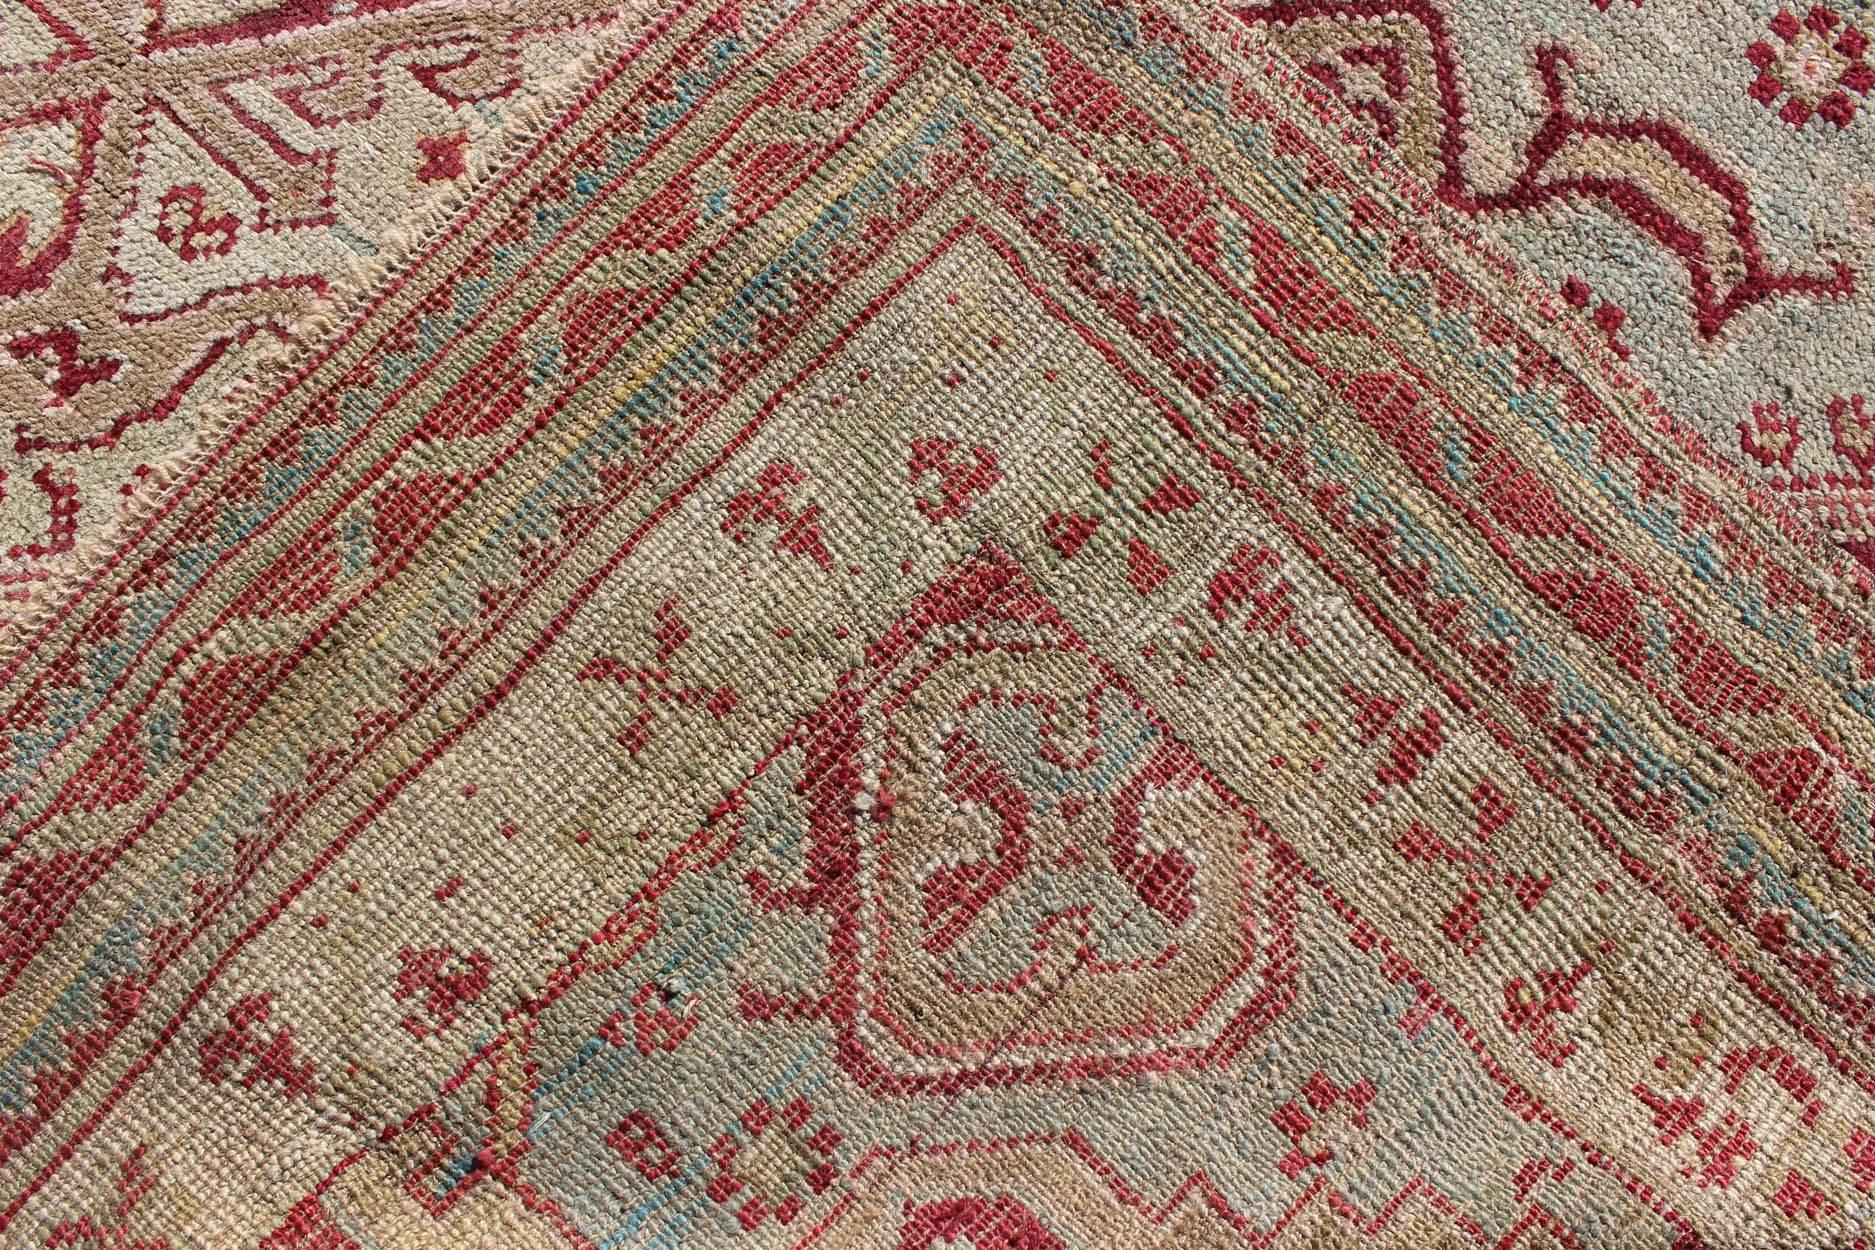 Antique Turkish Ghiordes 19th Century Rug in Raspberry Red, Ice Blue & L. Green For Sale 1